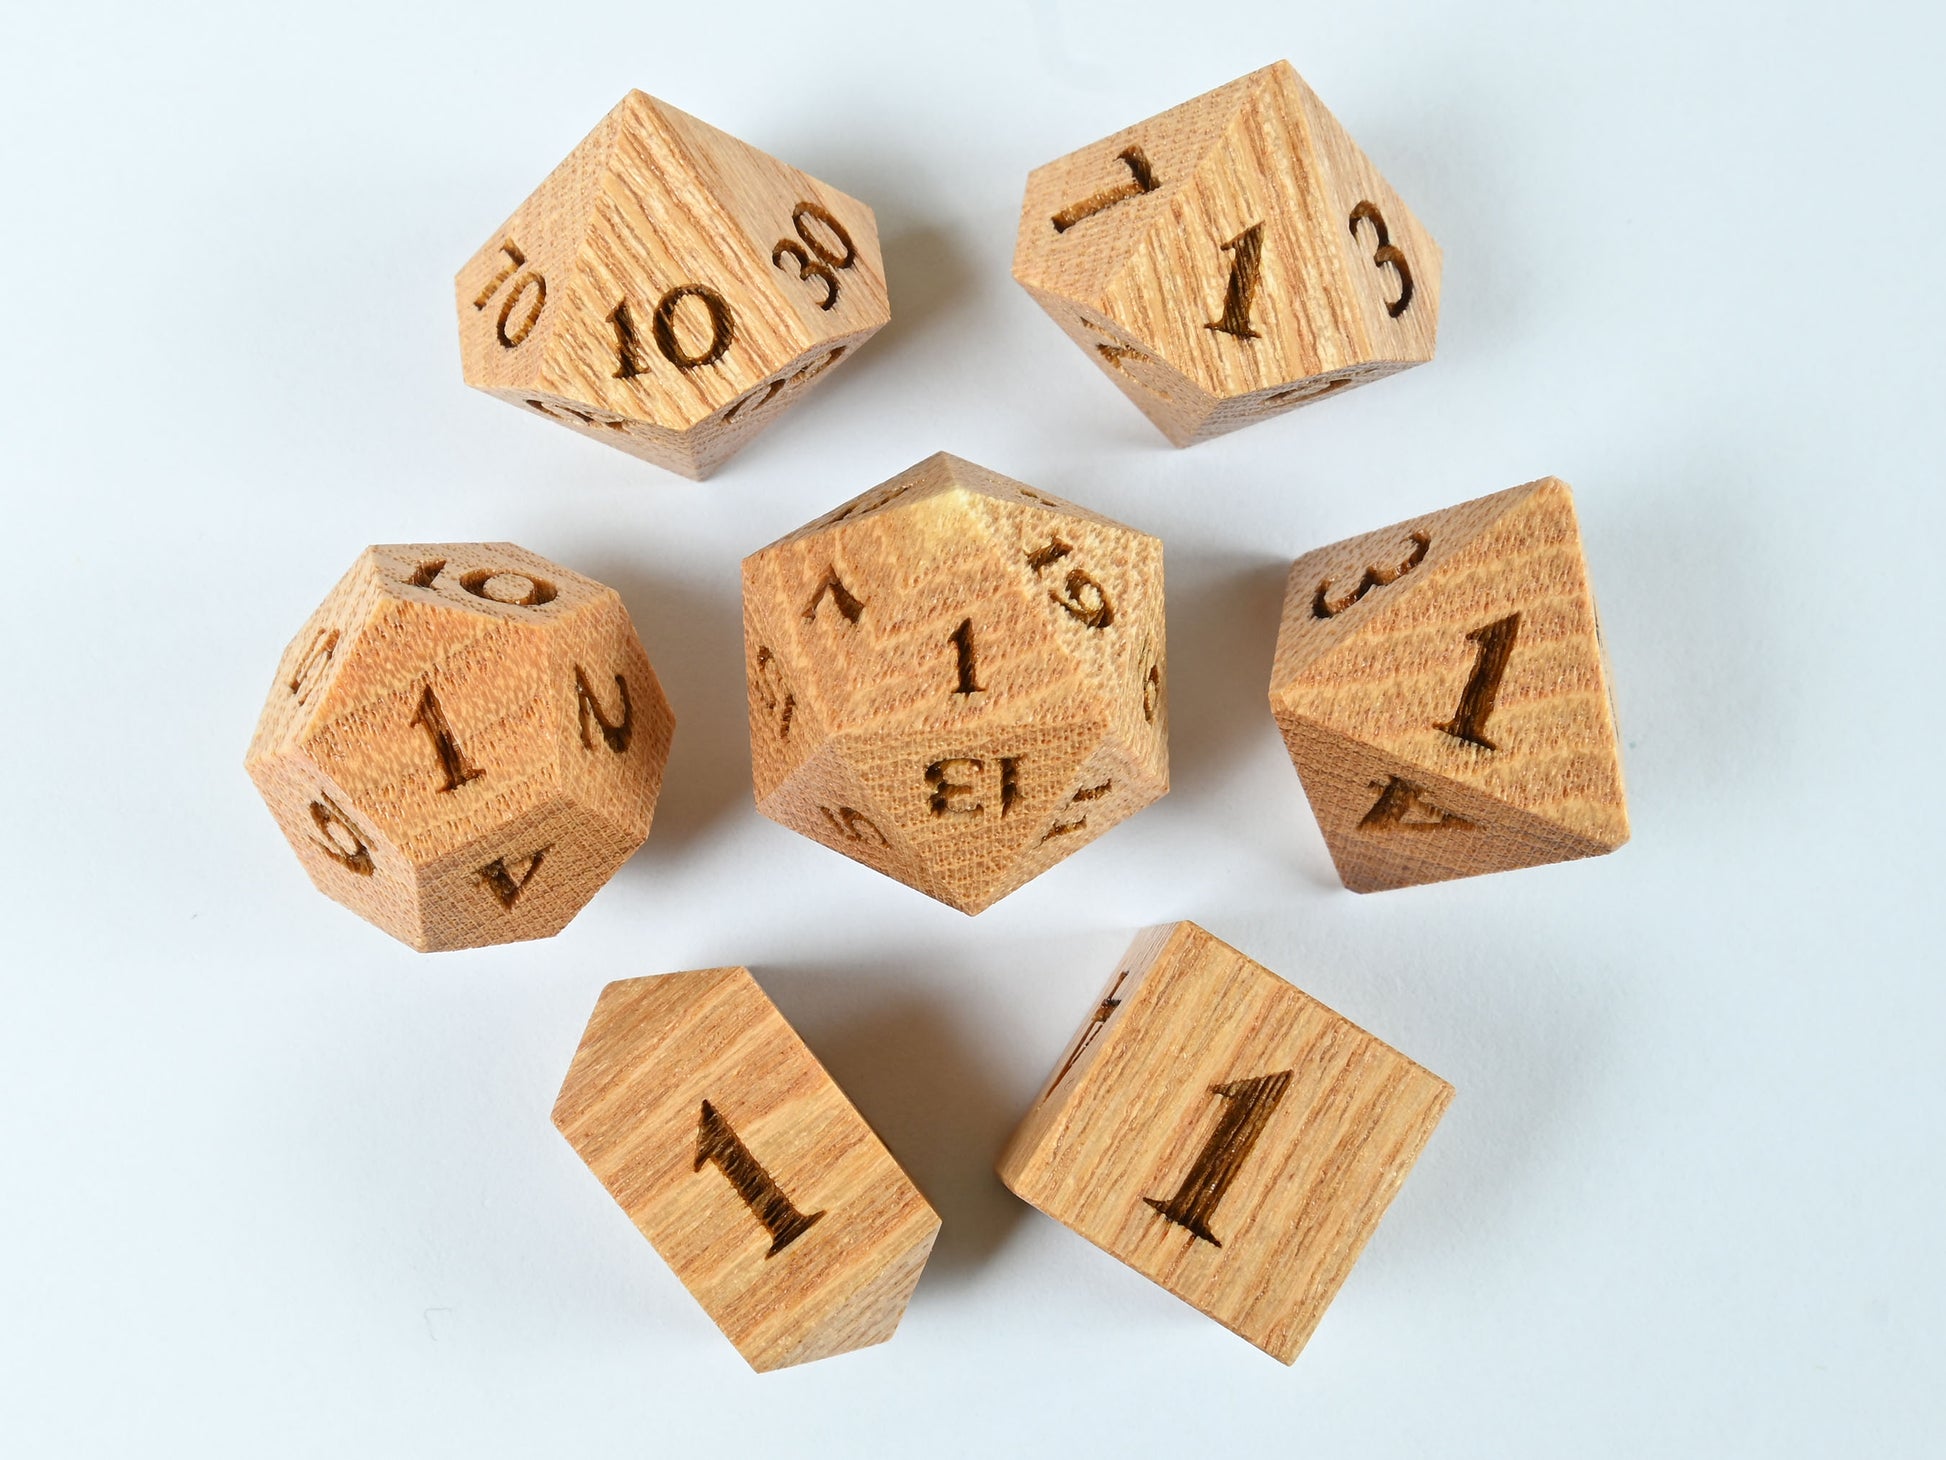 Coffeetree wood dice set for dnd rpg